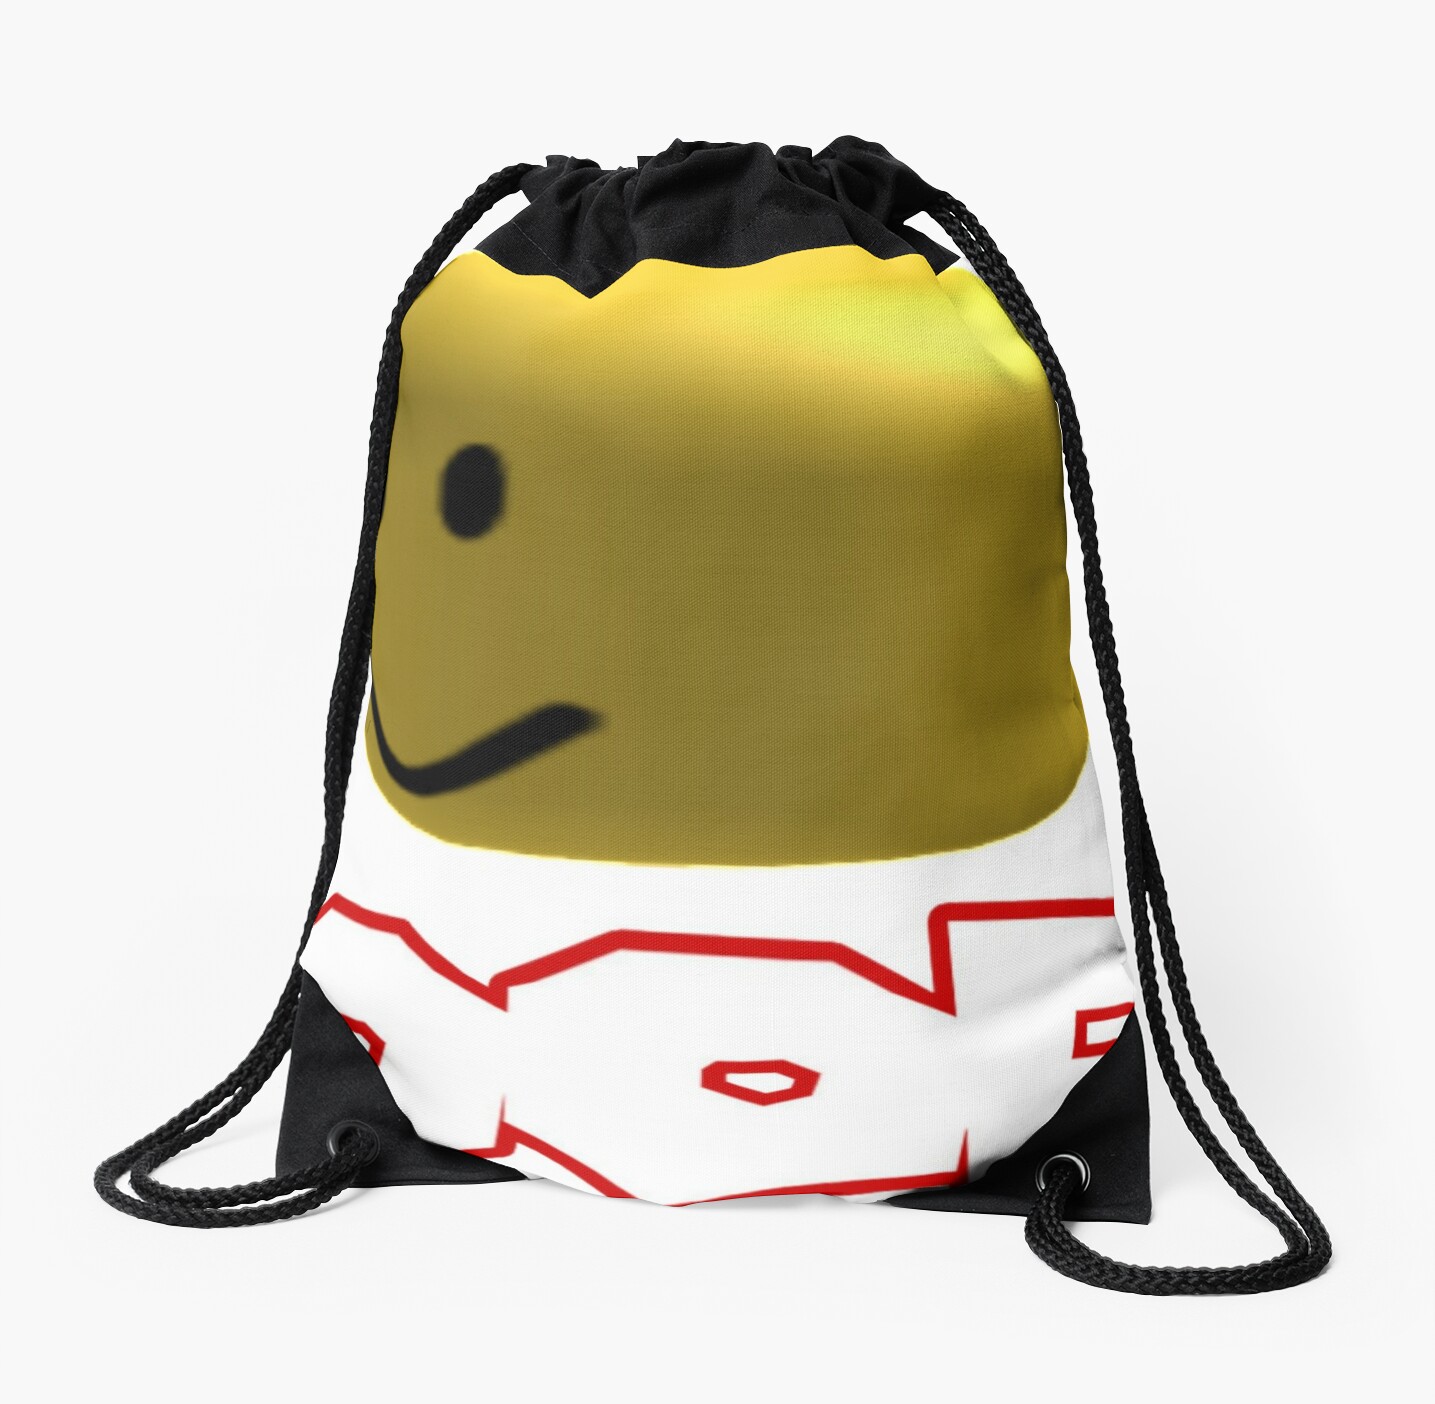 Oof Revisioned Drawstring Bag By Colonelsanders Redbubble - vaporwave roblox death sound fun games robux cs go oof meme